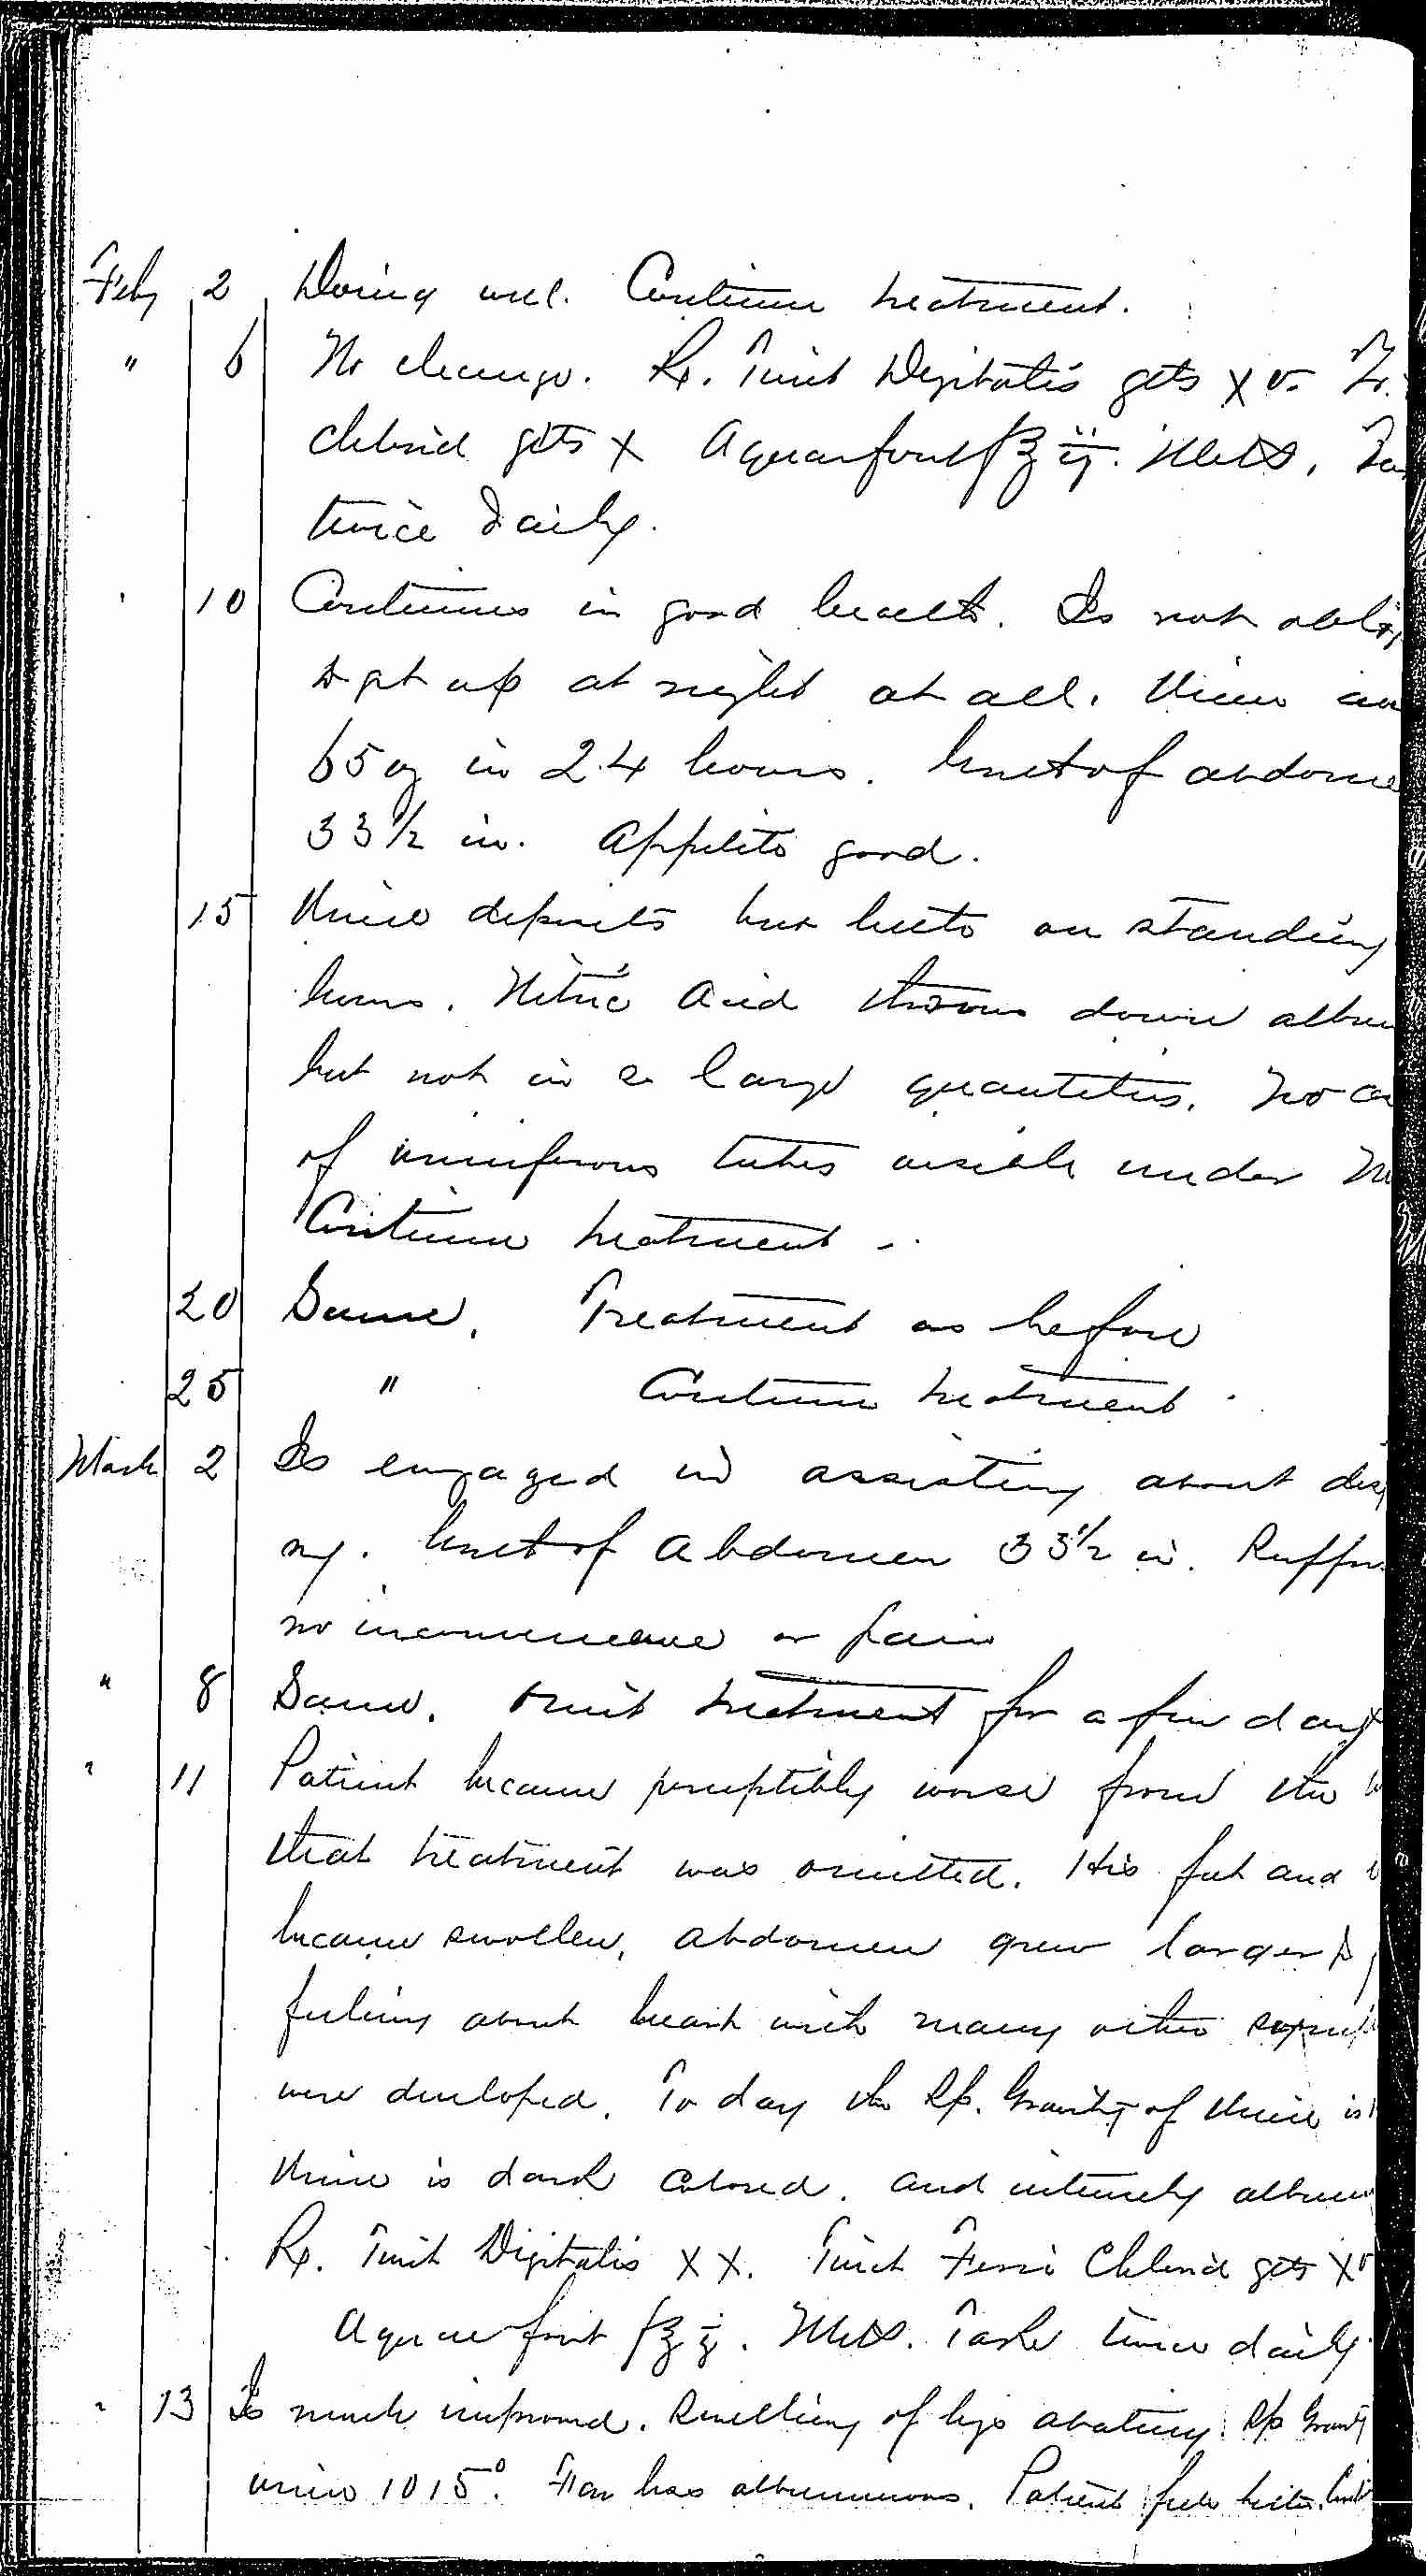 Entry for Bernard Coyne (page 12 of 13) in the log Hospital Tickets and Case Papers - Naval Hospital - Washington, D.C. - 1868-69